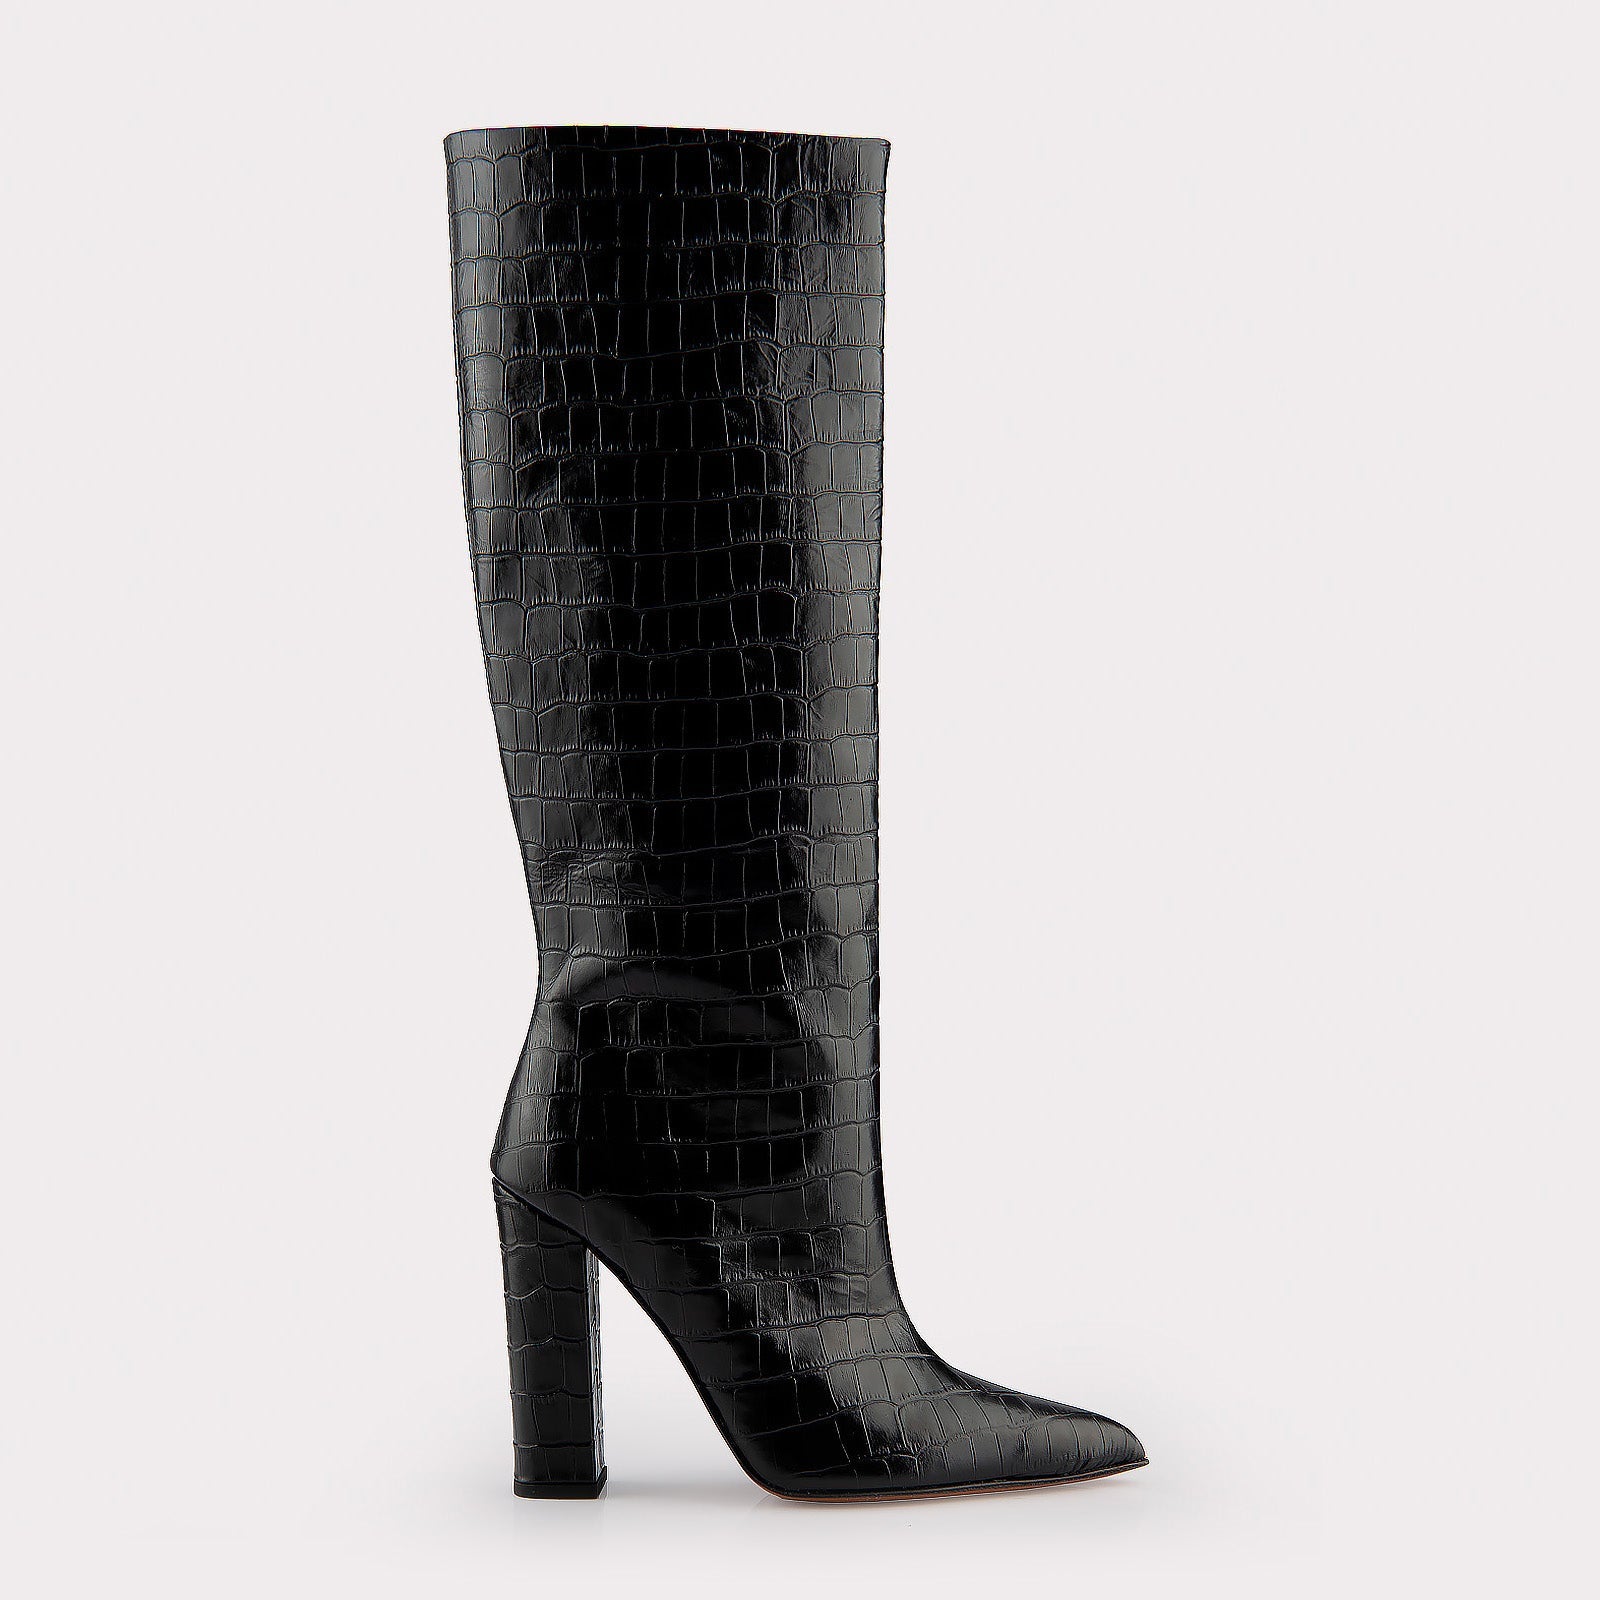 TEXTURED-LEATHER BOOTS LILYANA